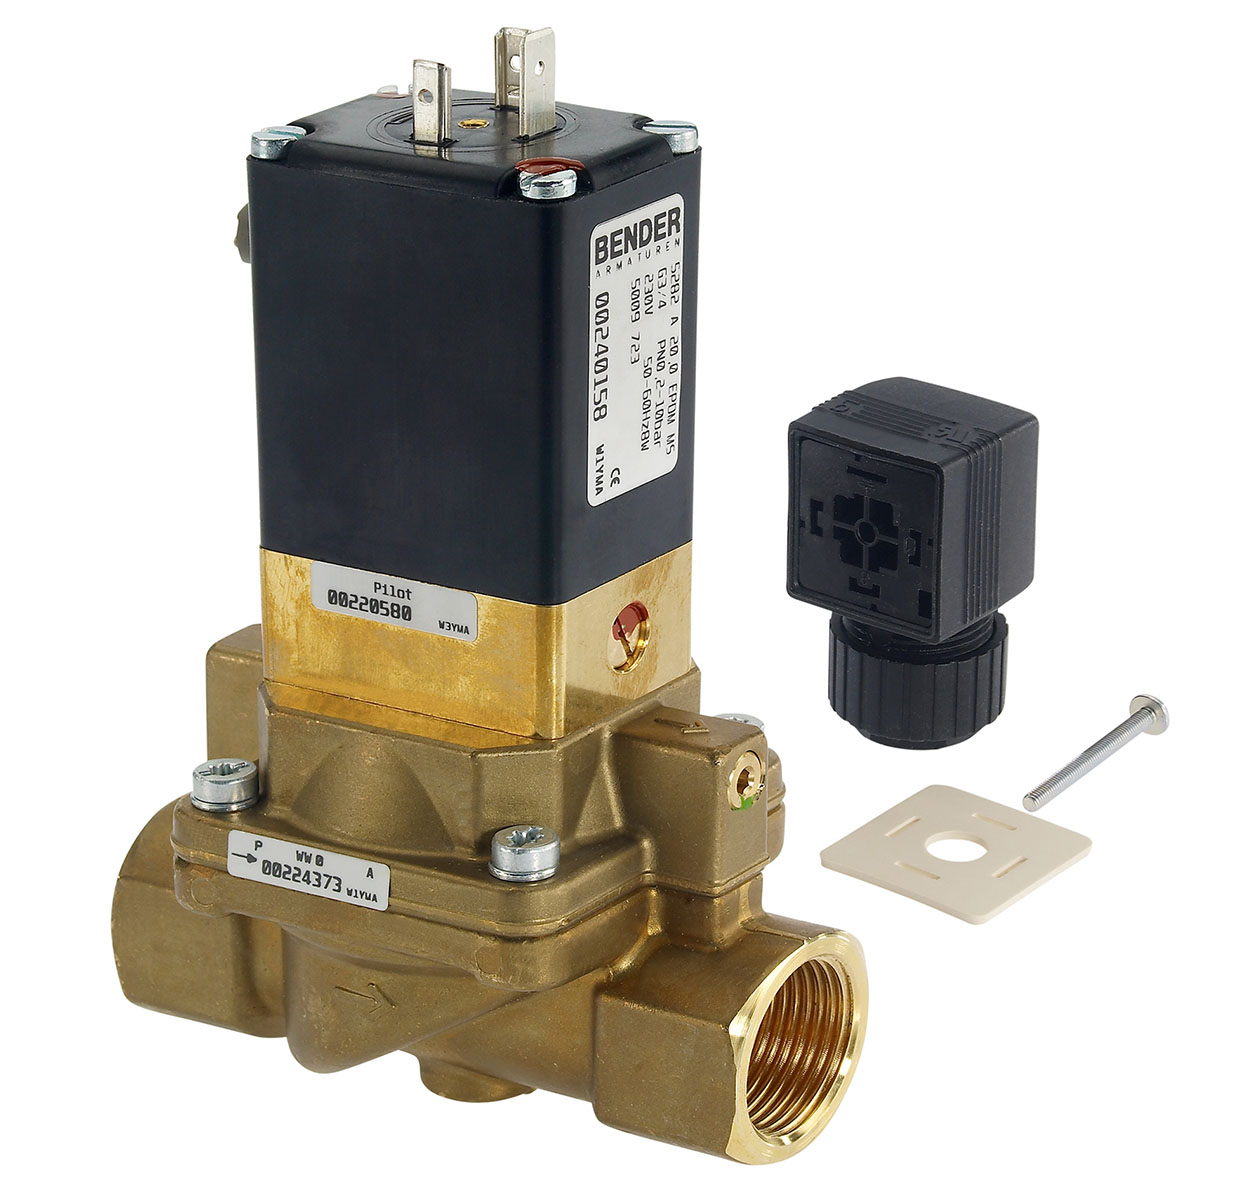 5009721 - 2/2 way solenoid valve normally closed for lightly soiled fluids Type 7; female thread